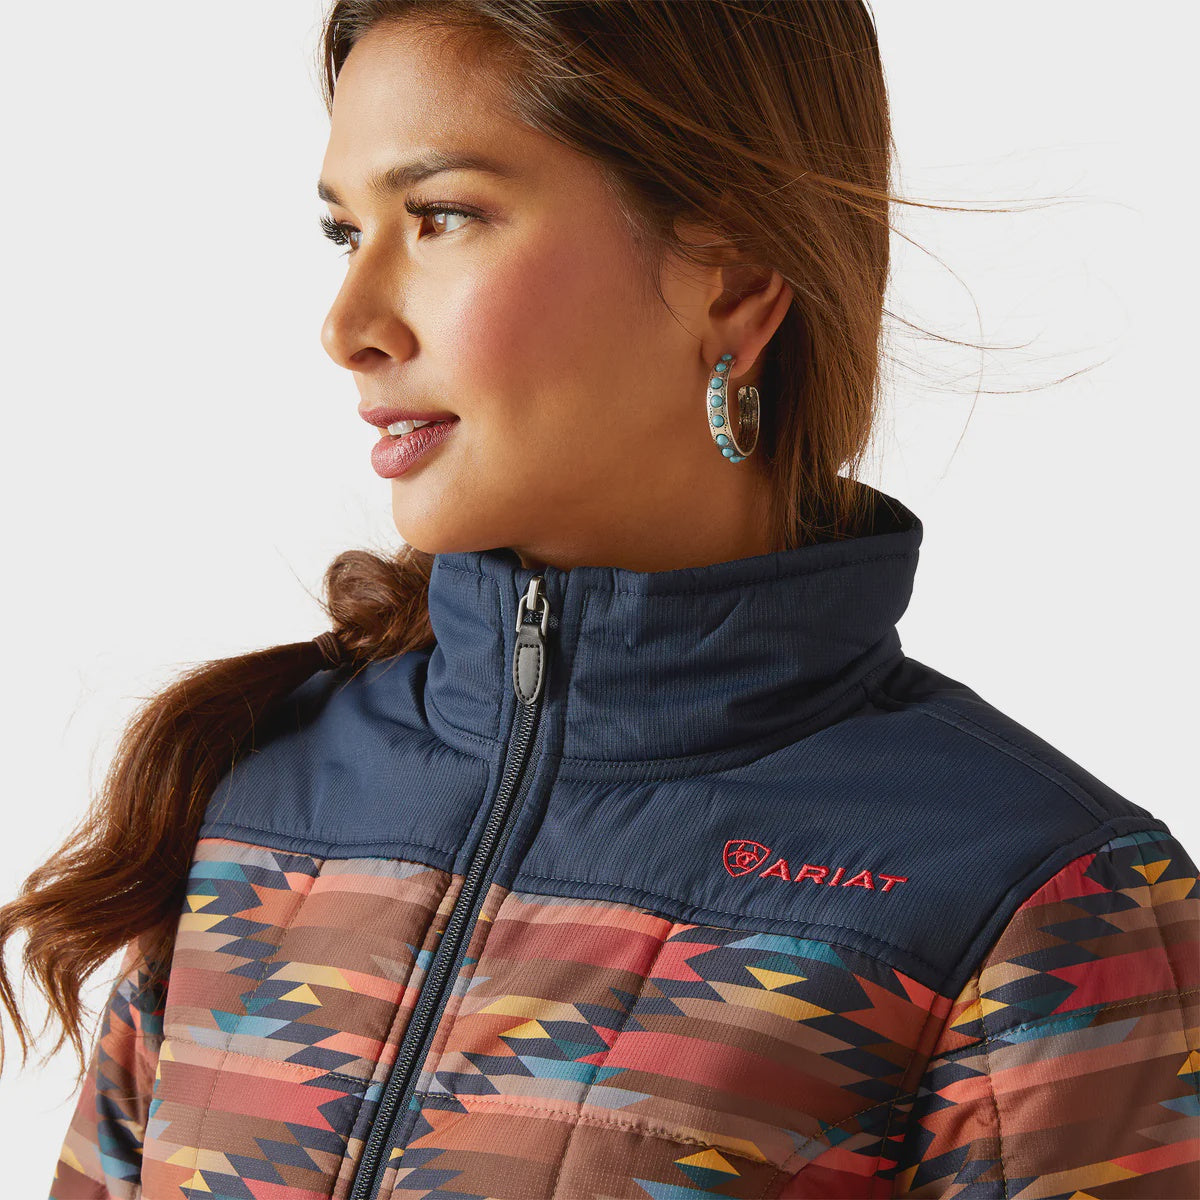 Womens Ariat REAL Crius Insulated Jacket - Mirage Print (7025712824397)